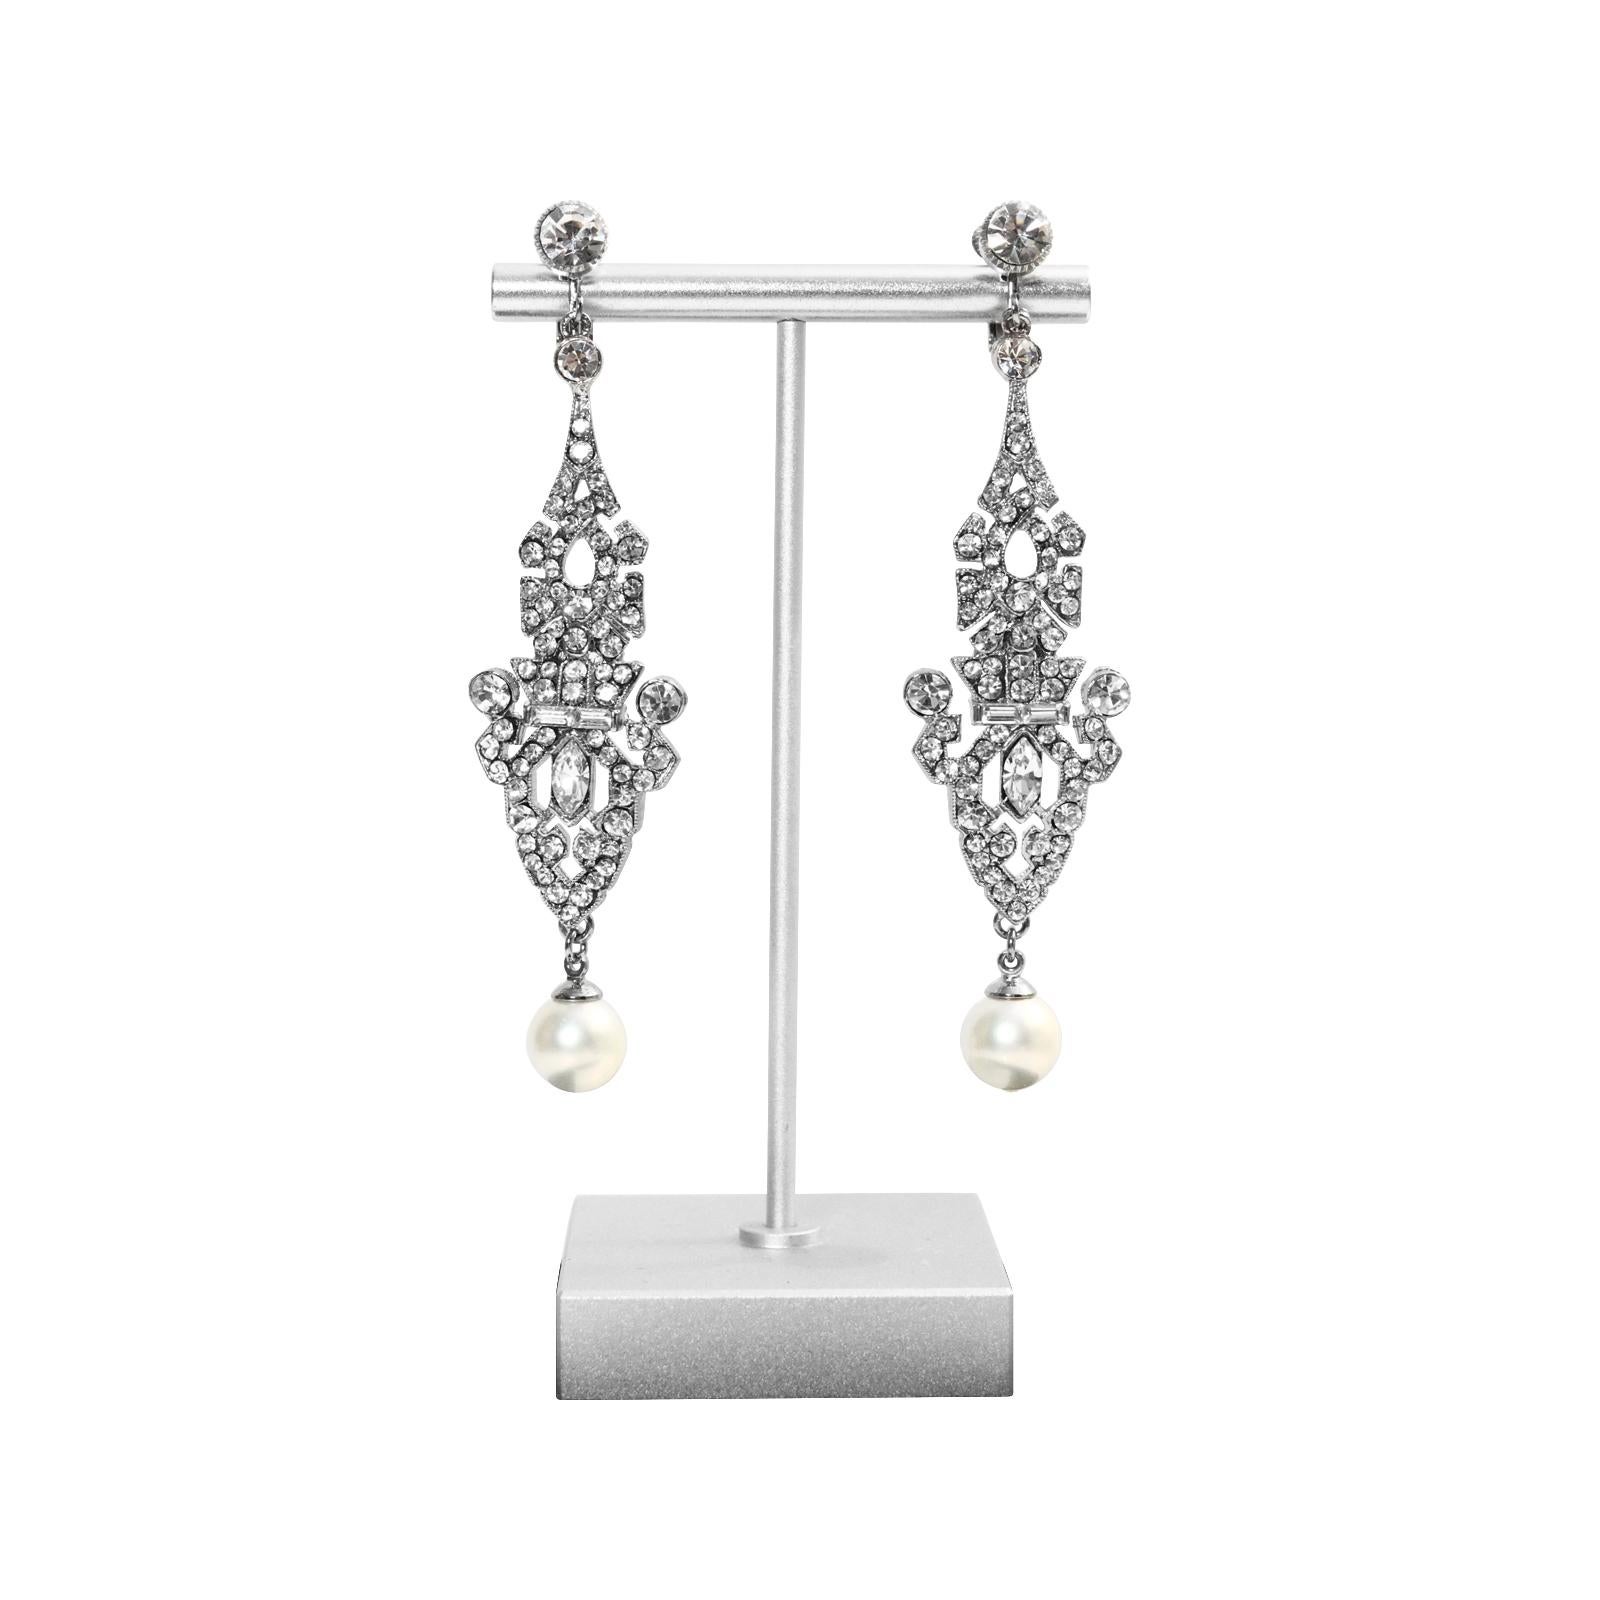 Vintage Art Deco Diamante with Faux Pearl Dangling Earrings, Circa 1980s For Sale 3